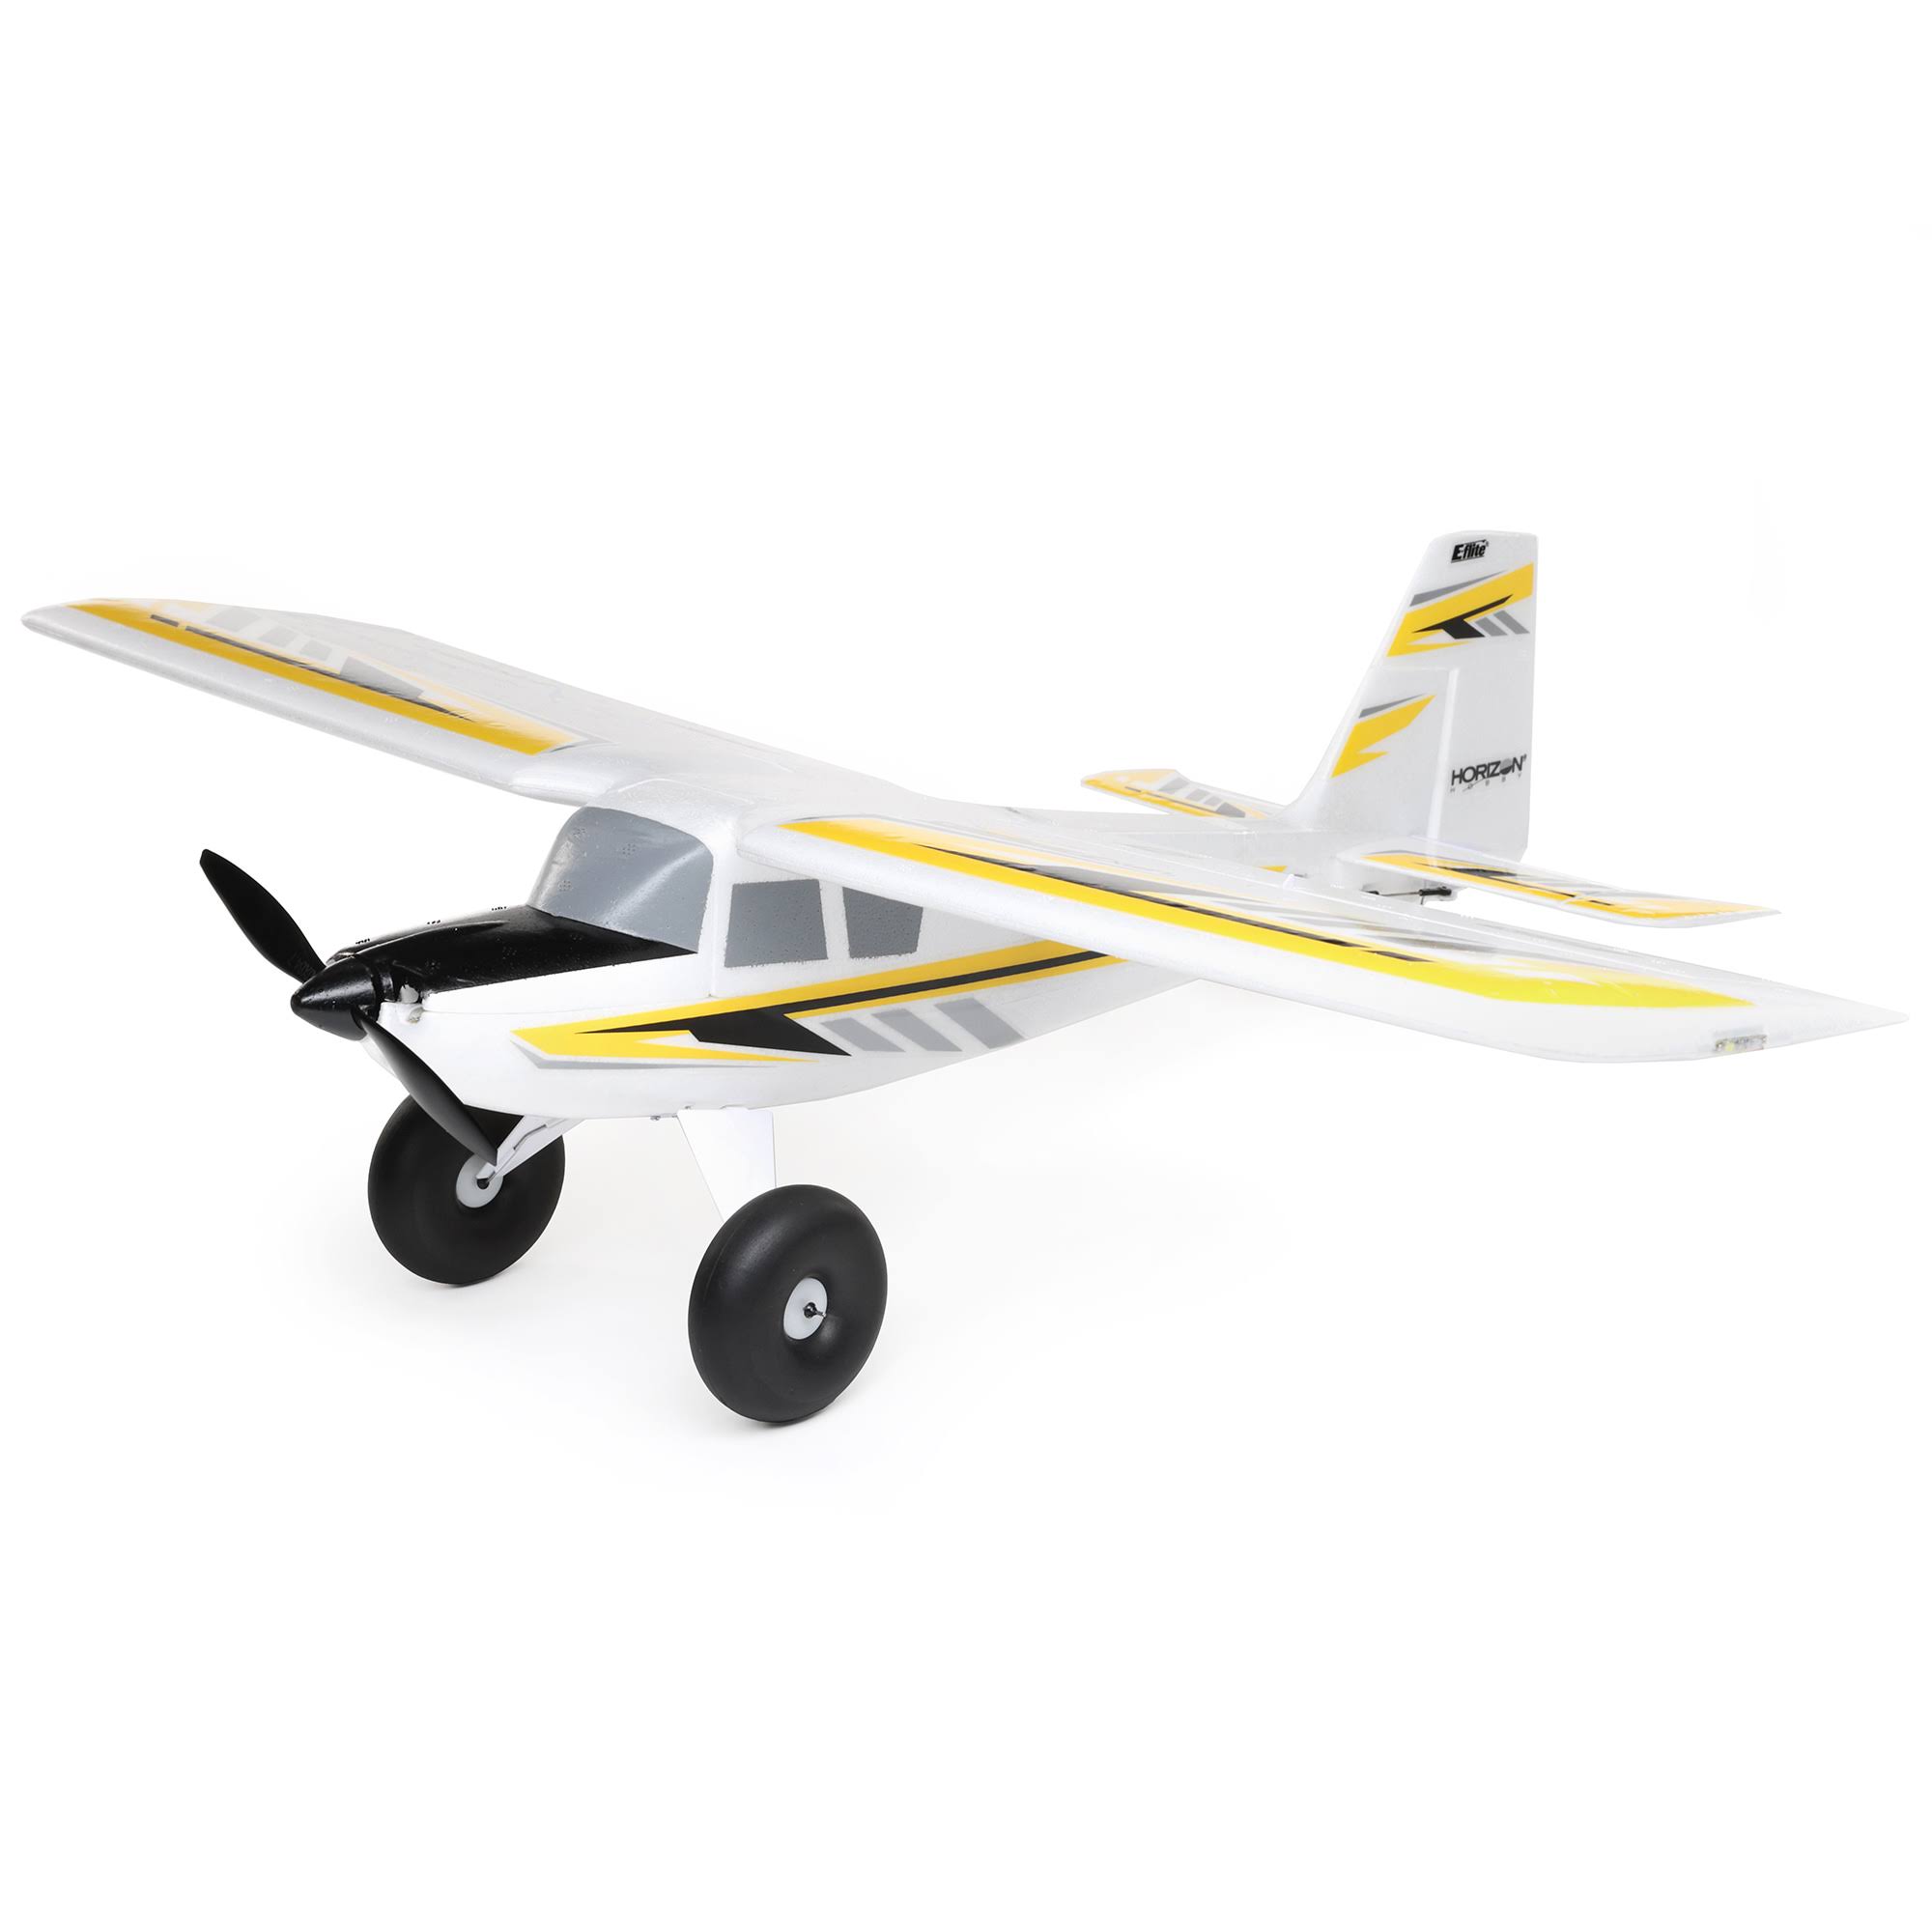 E-flite UMX Timber x BNF Basic with AS3X and Safe Select - 570mm